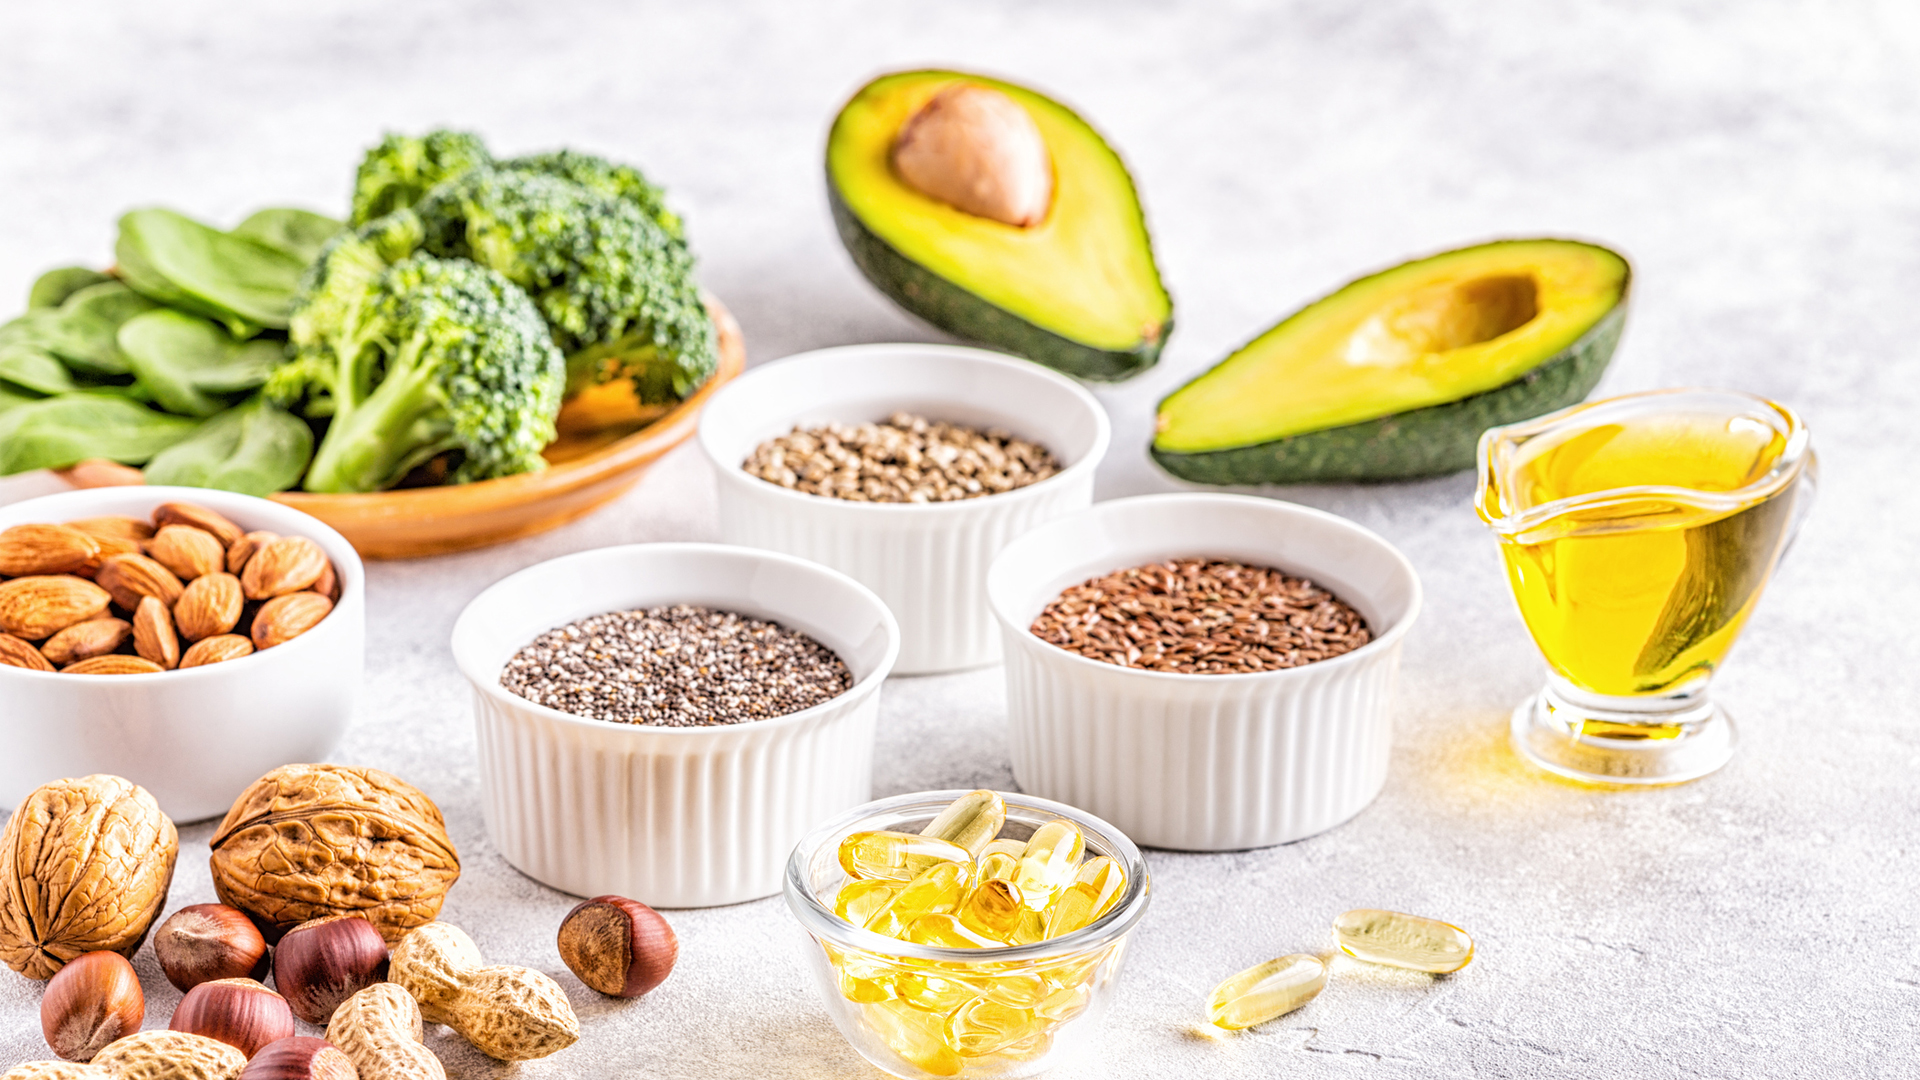 Healthy sources of unsaturated fats including olive oil, nuts, seeds, and avocados